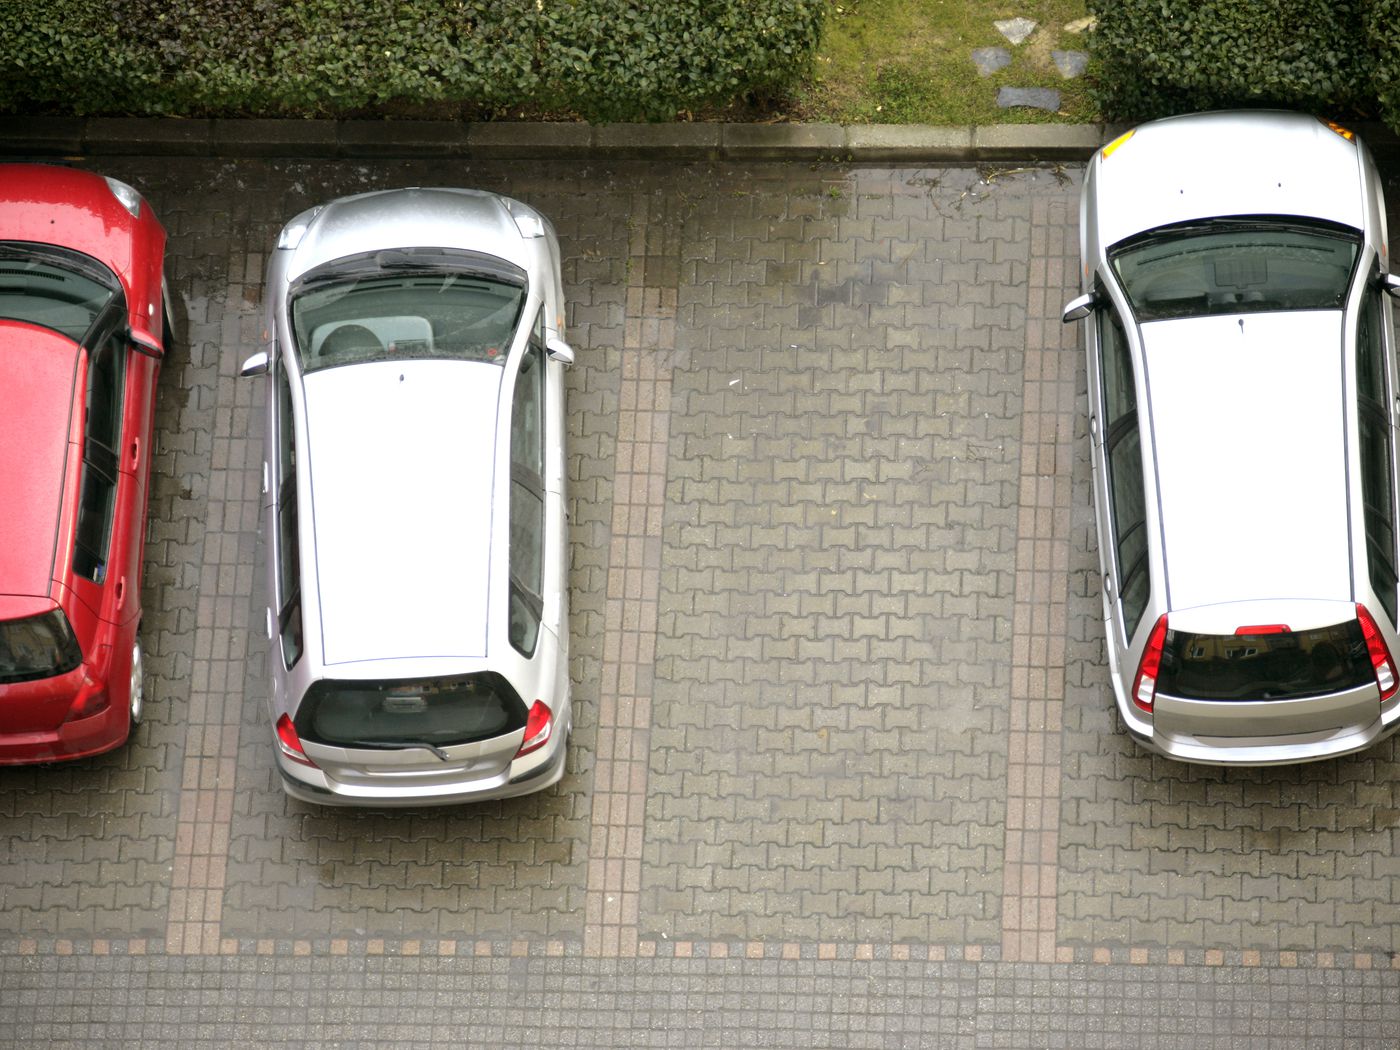 It's much safer to back into parking spaces. Why don't we do it? - Vox